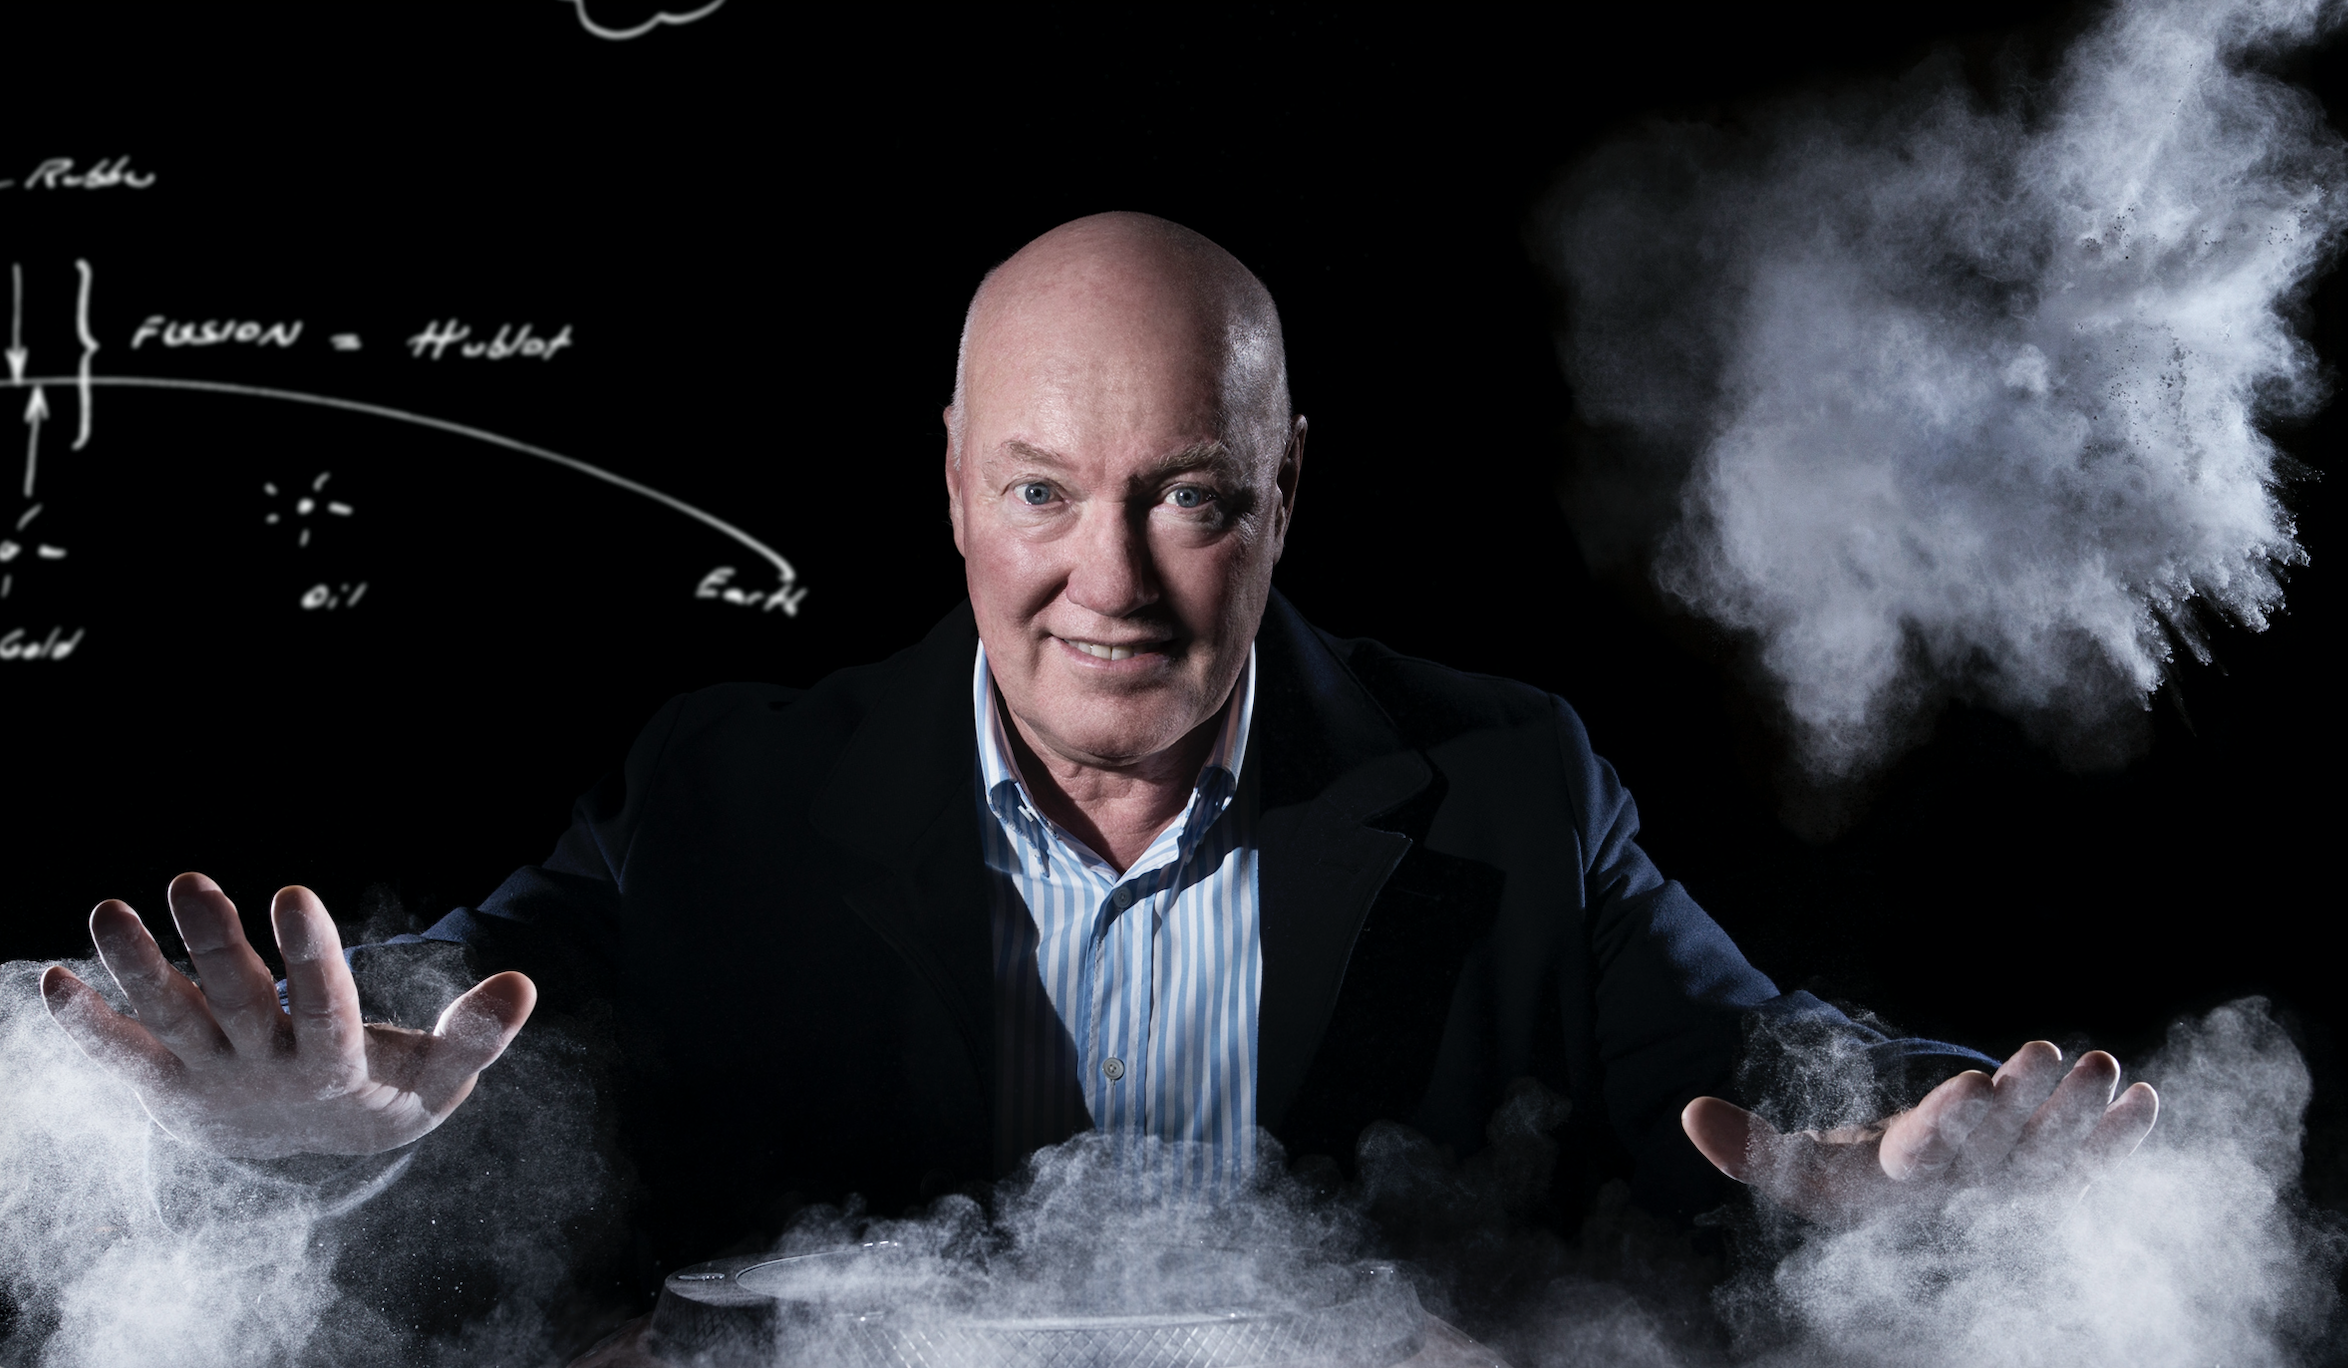 Jean-Claude Biver takes to Hublot's helm with characteristic gusto